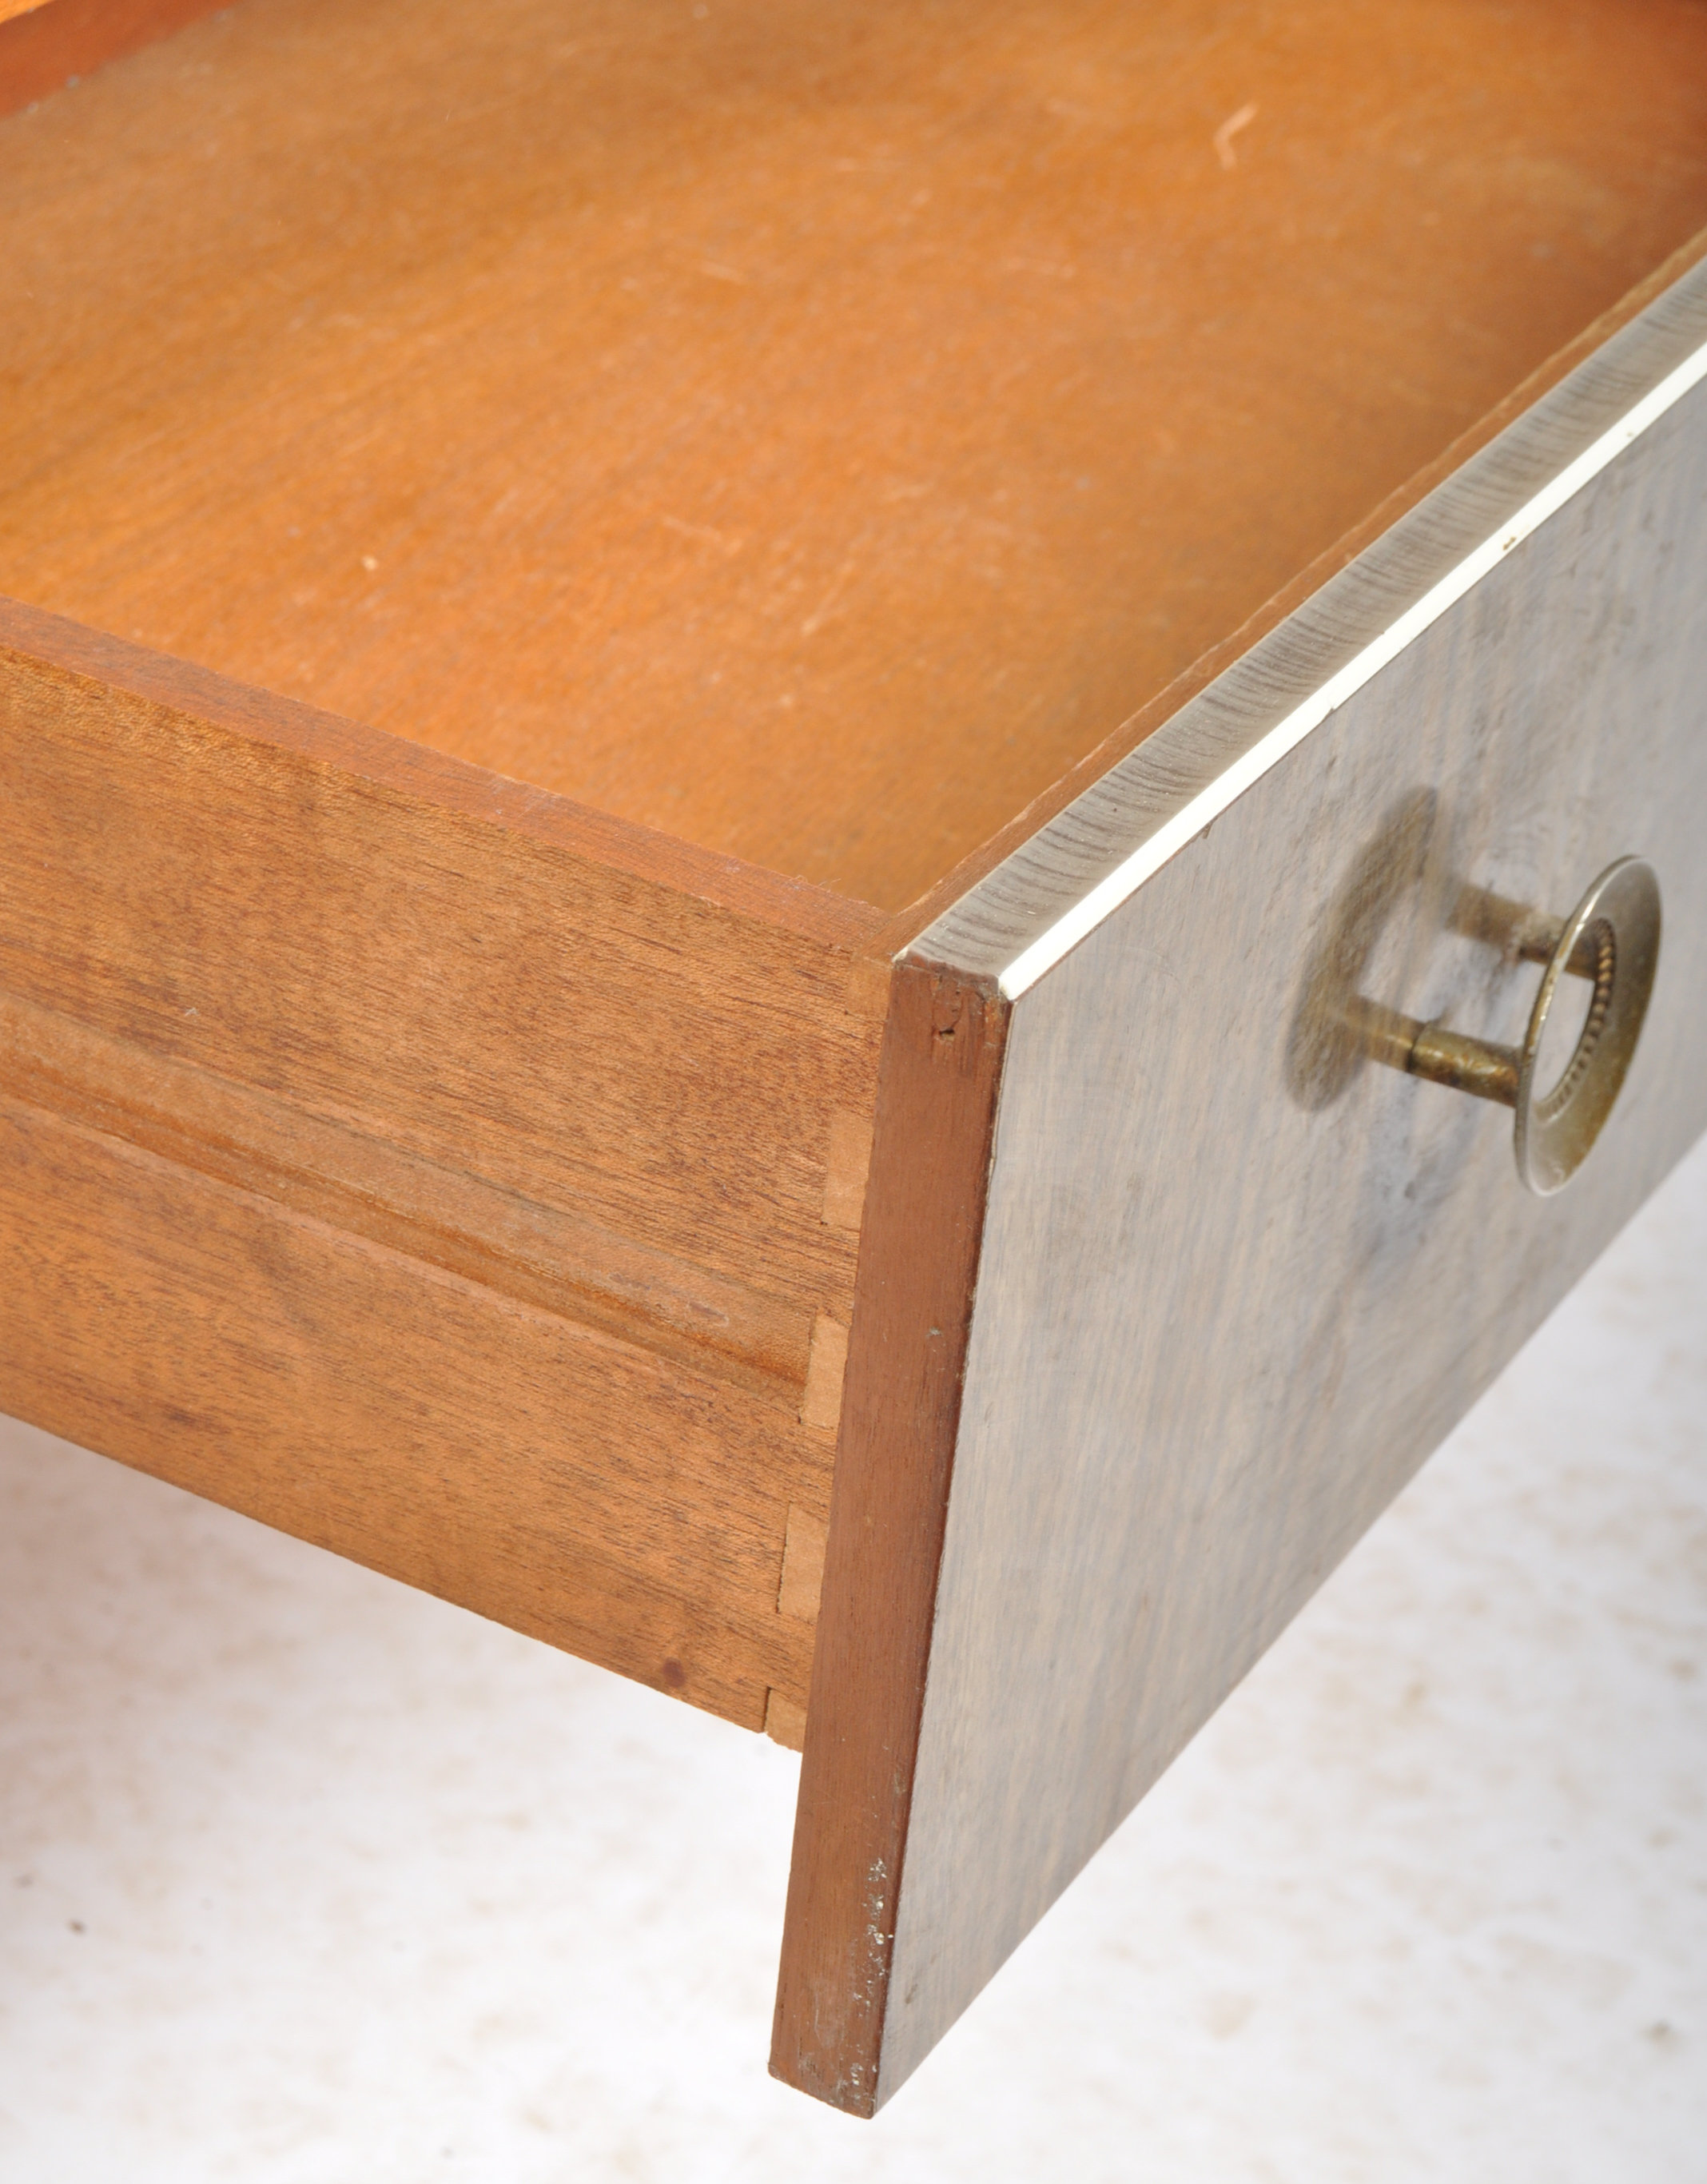 RETRO MID CENTURY SYCAMORE AND WALNUT FORMICA SIDEBOARD - Image 6 of 6